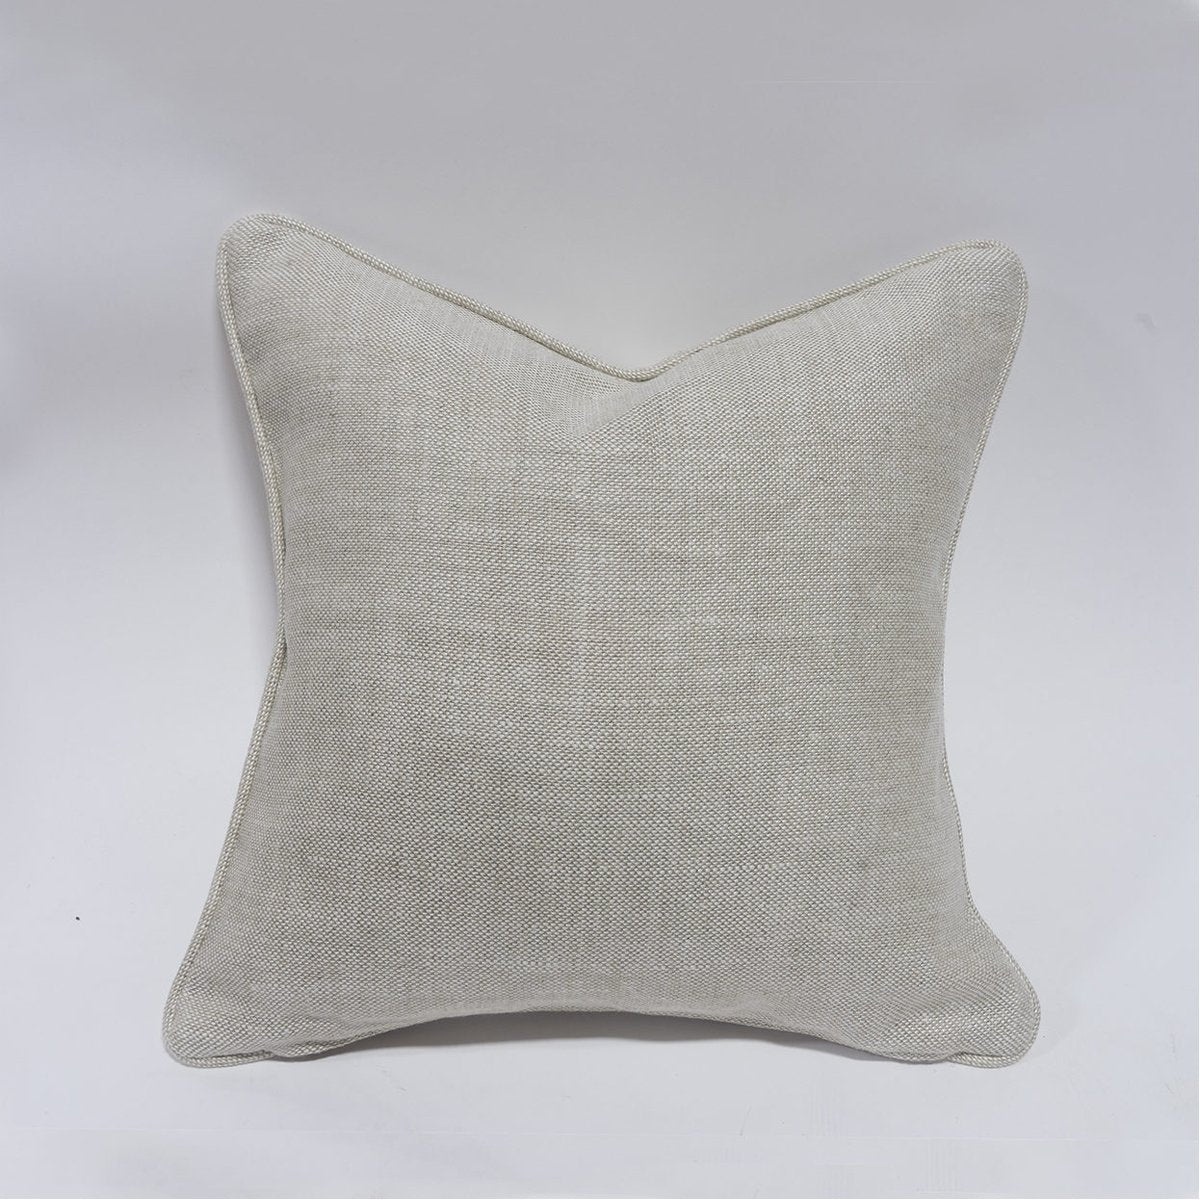 Palecek 18" Square Down Pillow with Welt